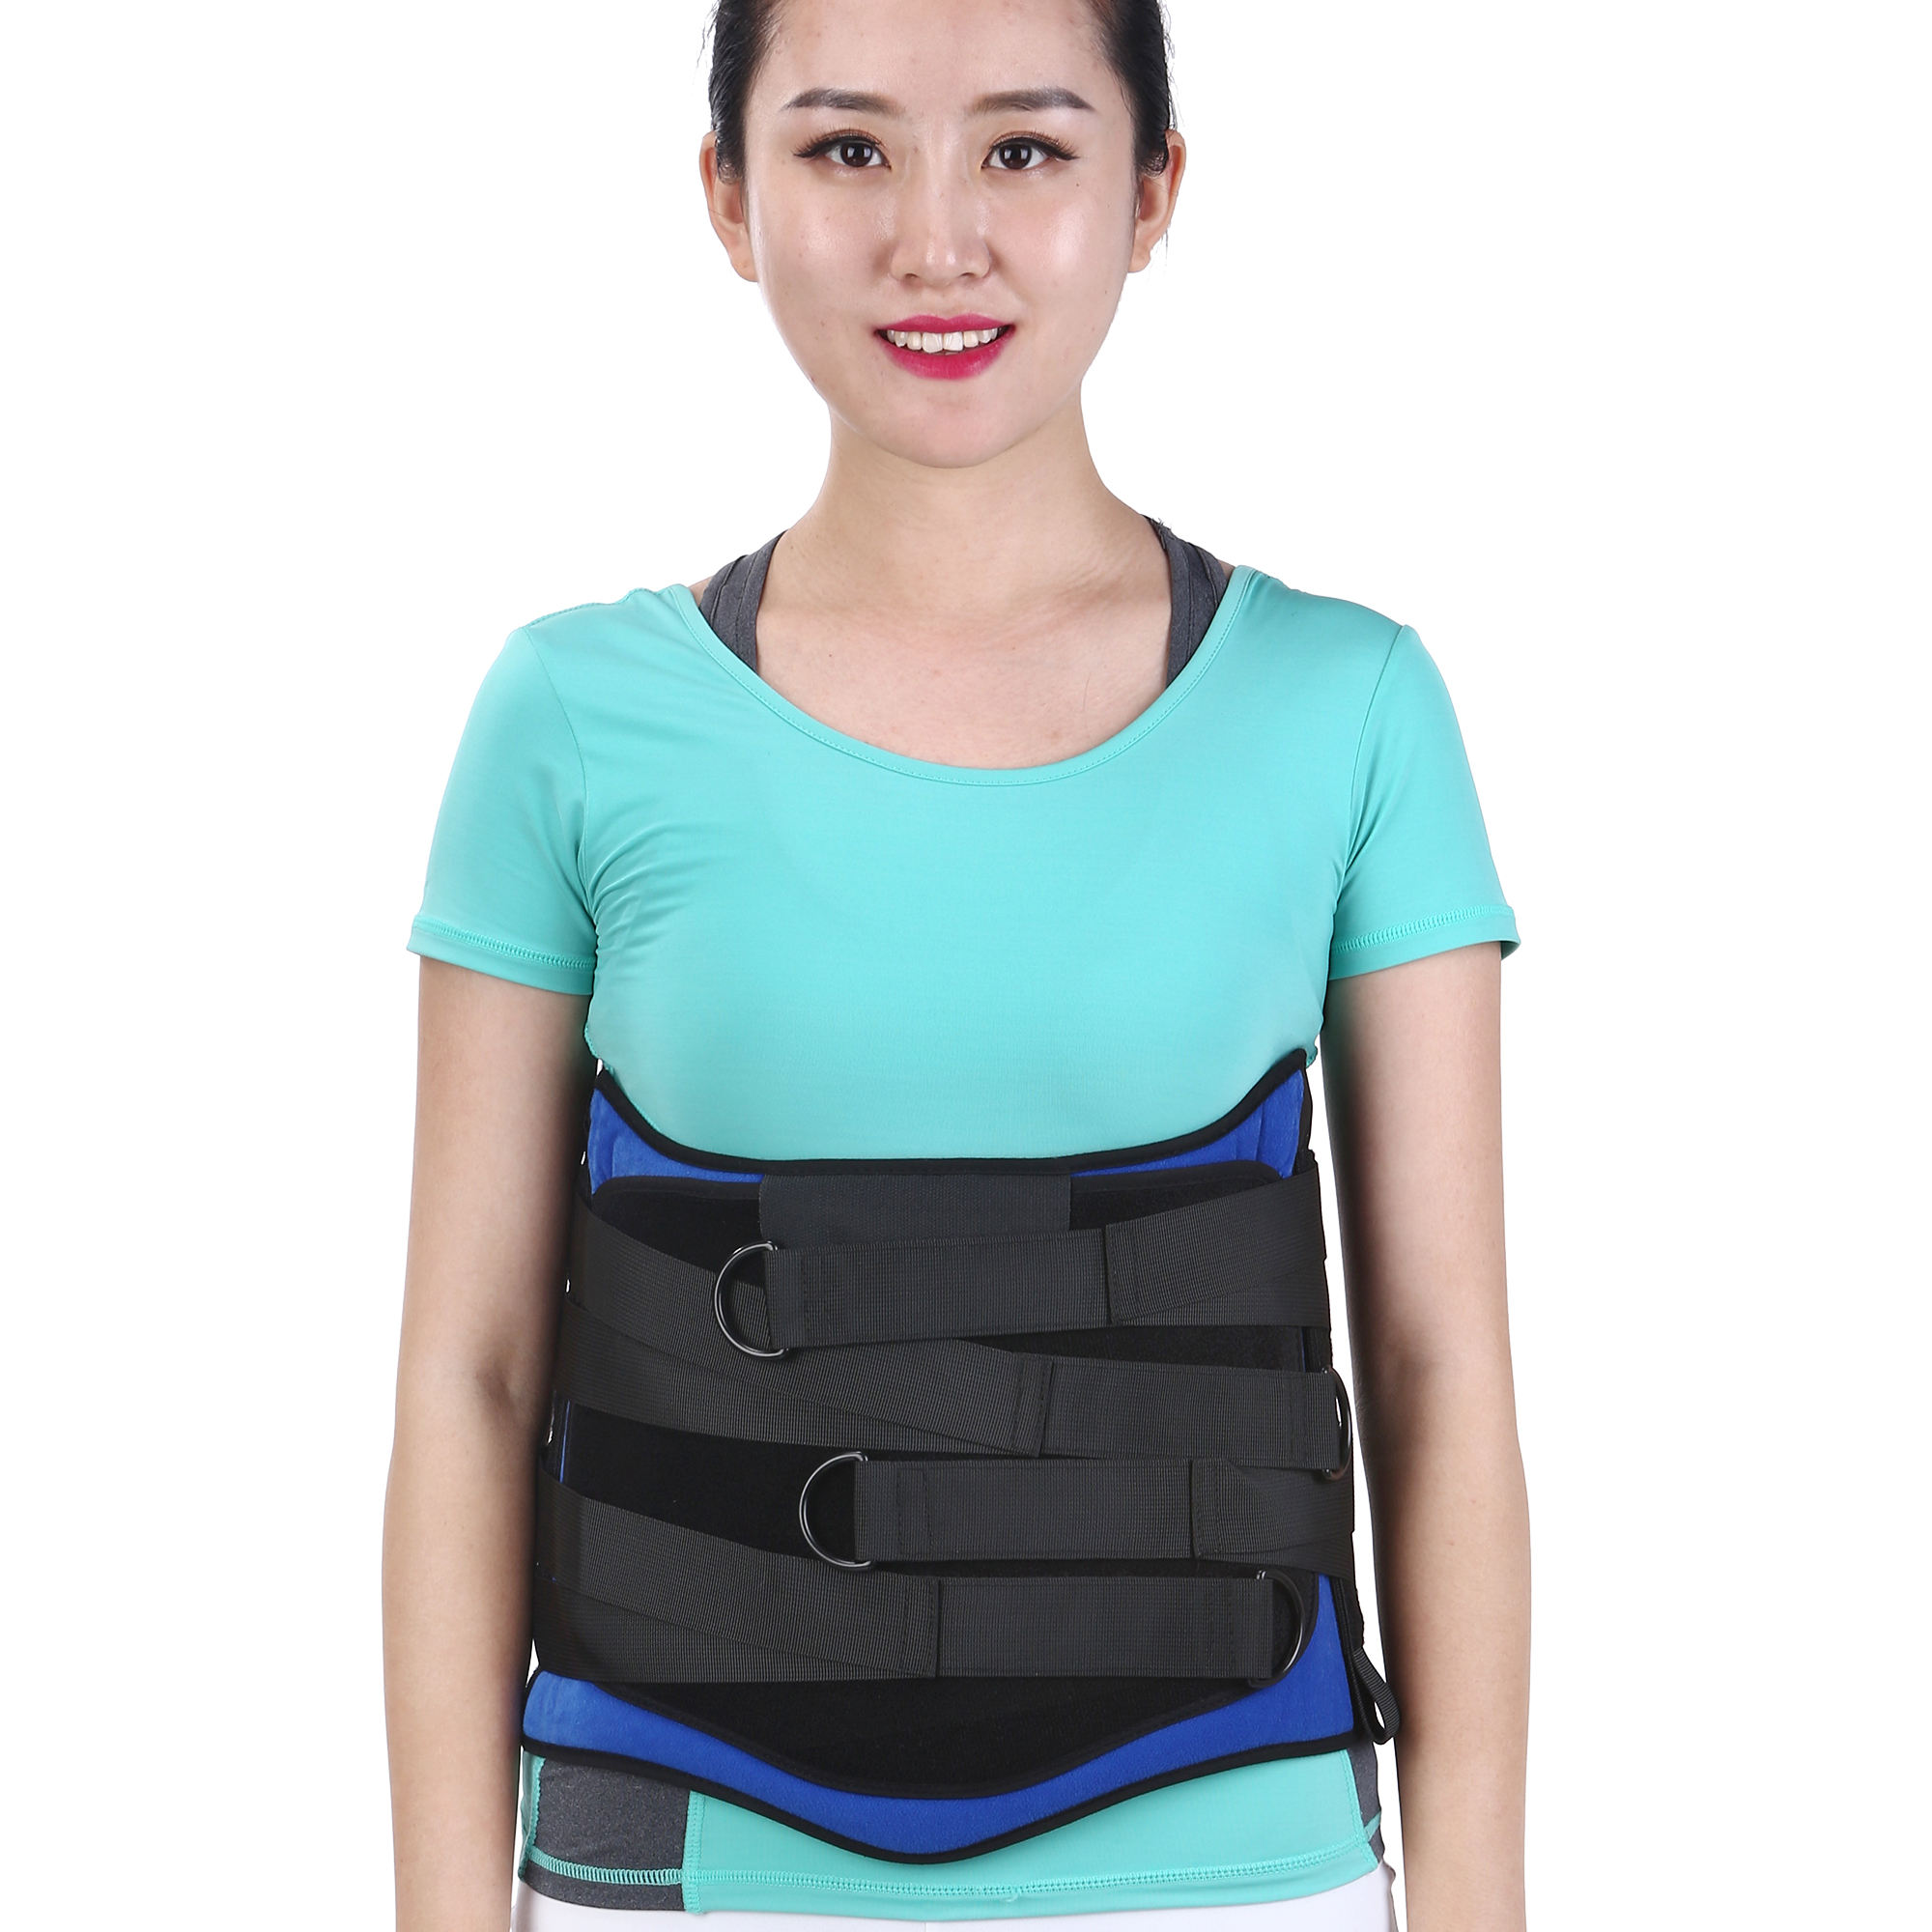 Rehabilitation Medical Lumbar Spine Fixed Brace For Lumbar Orthosis Support